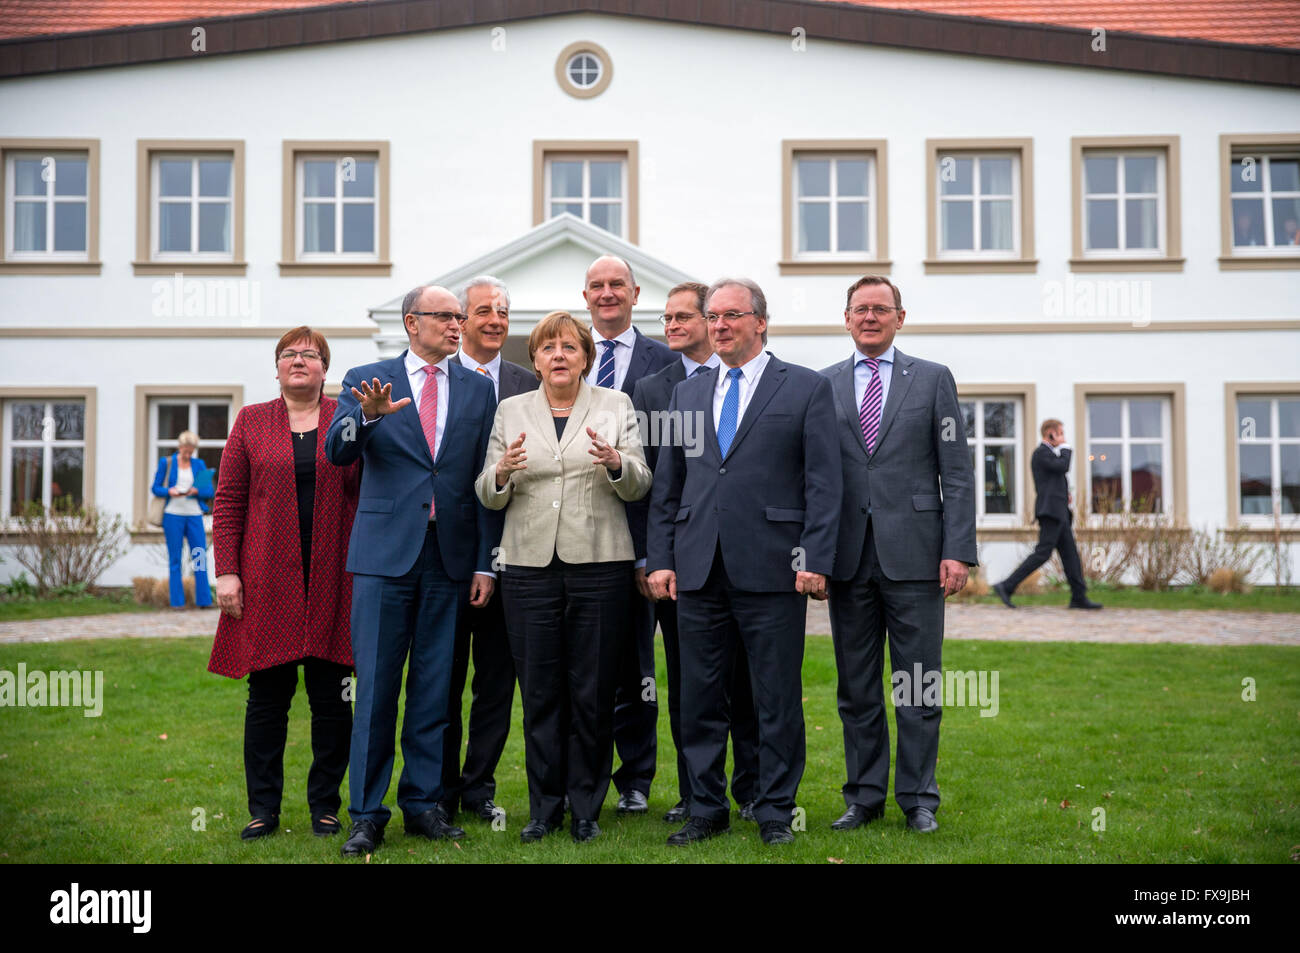 German Chancellor Angela Merkel (CDU, C) meets the premiers of the German states in eastern Germany Erwin Sellering (Mecklenburg-Western Pomerania, SPD, 2nd L), Dietmar Woidke (Brandenburg, SPD, 4th R.), Michael Mueller (Berlin, SPD, 3rd R), Reiner Haseloff (Saxony-Anhalt, CDU, 2nd R), Stanislaw Tillich (Saxony, CDU, §rd L), Bodo Ramelow (Thuringia, Die Linke, r) the government commissioner, Parliamentary State Secretary Iris Gleicke (SPD, l) at the conference hall at Stolpe manor near Anklam, Germany, 13 April 2016. The premiers are meeting for the 43rd conference of German states in eastern Stock Photo